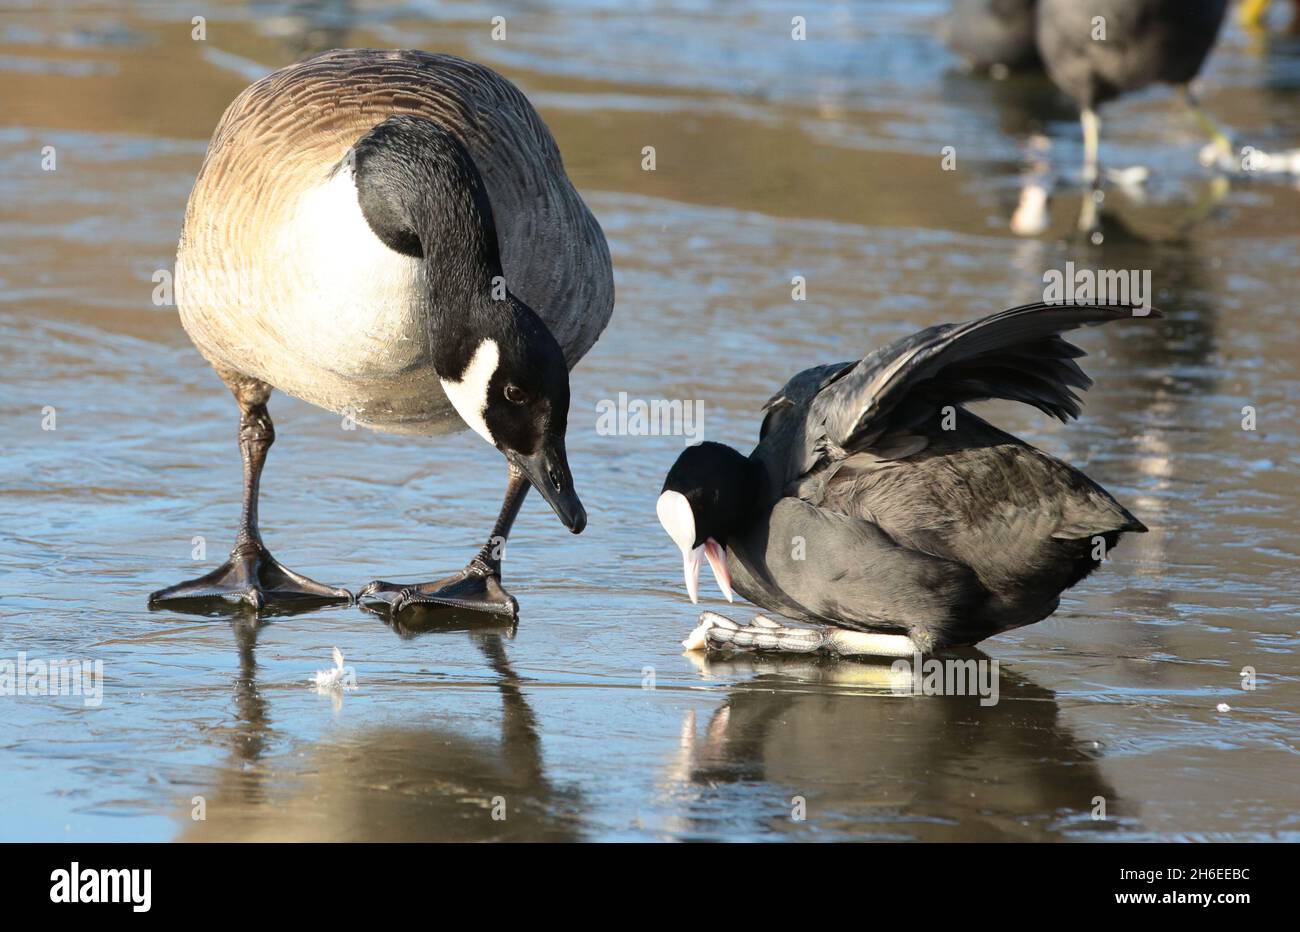 Birds slide on a icy pond in East London. Stock Photo